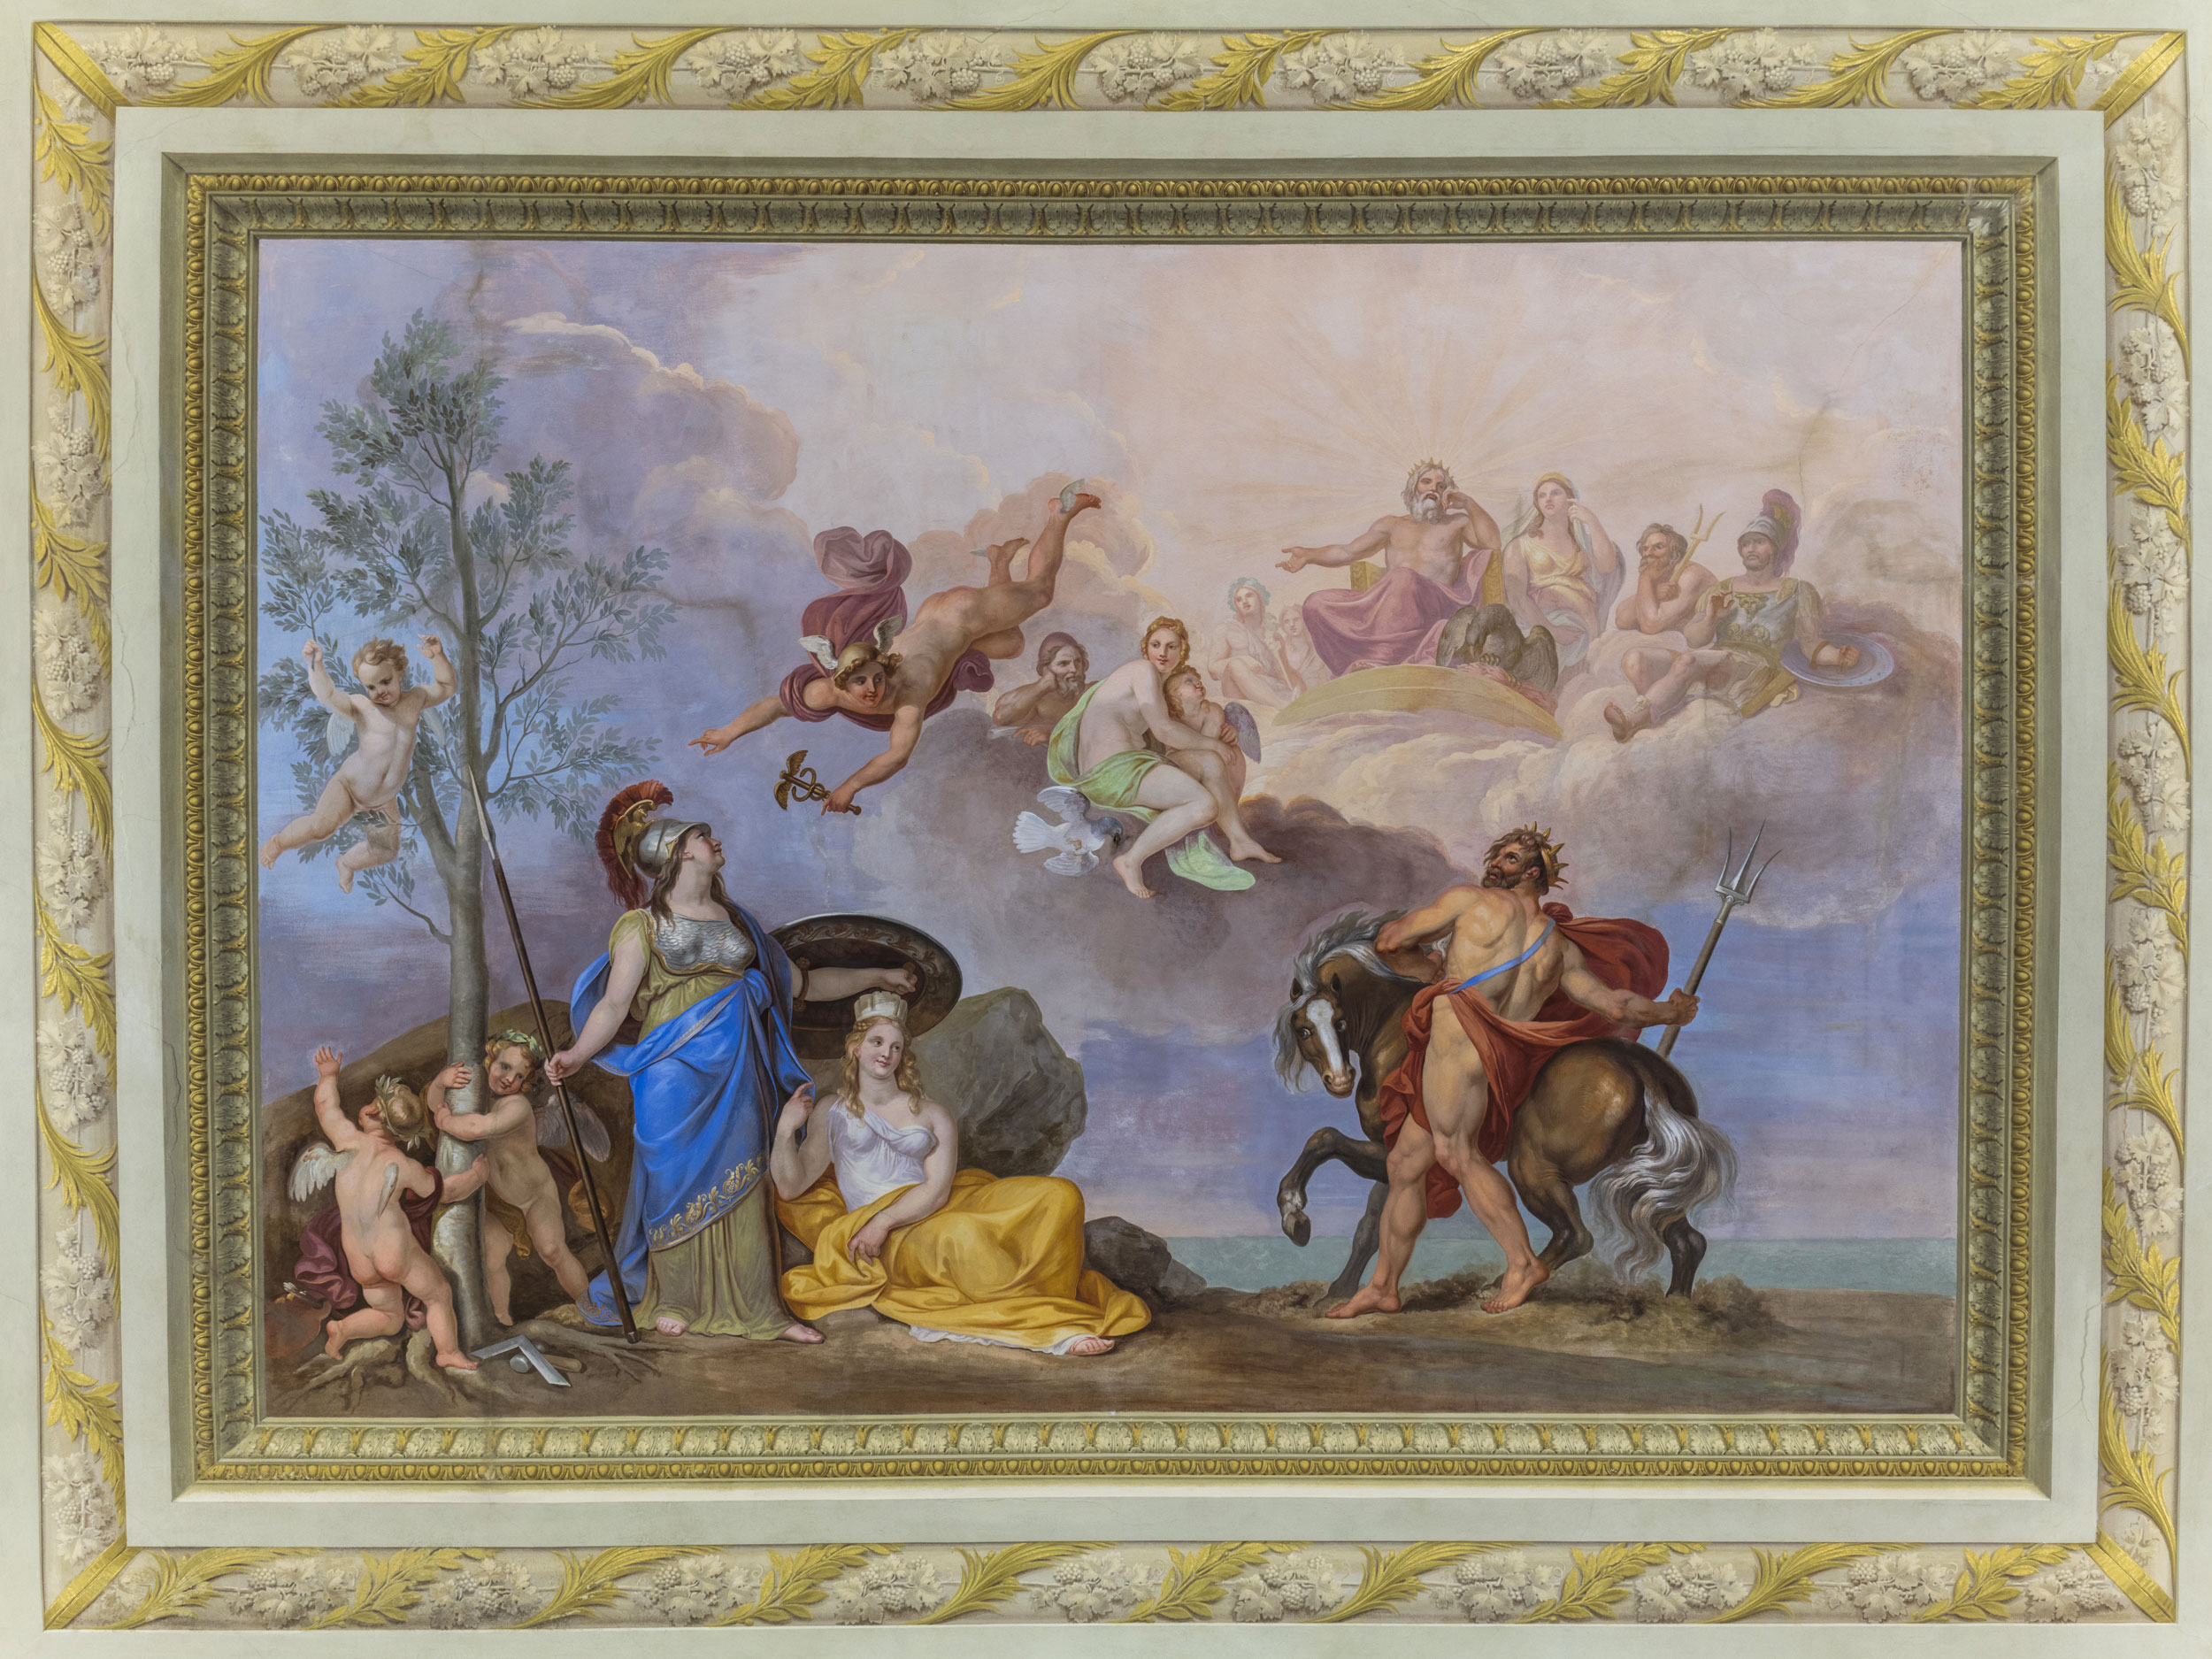 The painting exhibited in the Throne Room illustrates the challenge between Pallas and Neptune for the name to give to Athena and alludes to the decisional communion between the King, the Councilors and the population in the state affairs. A garland frames the scene